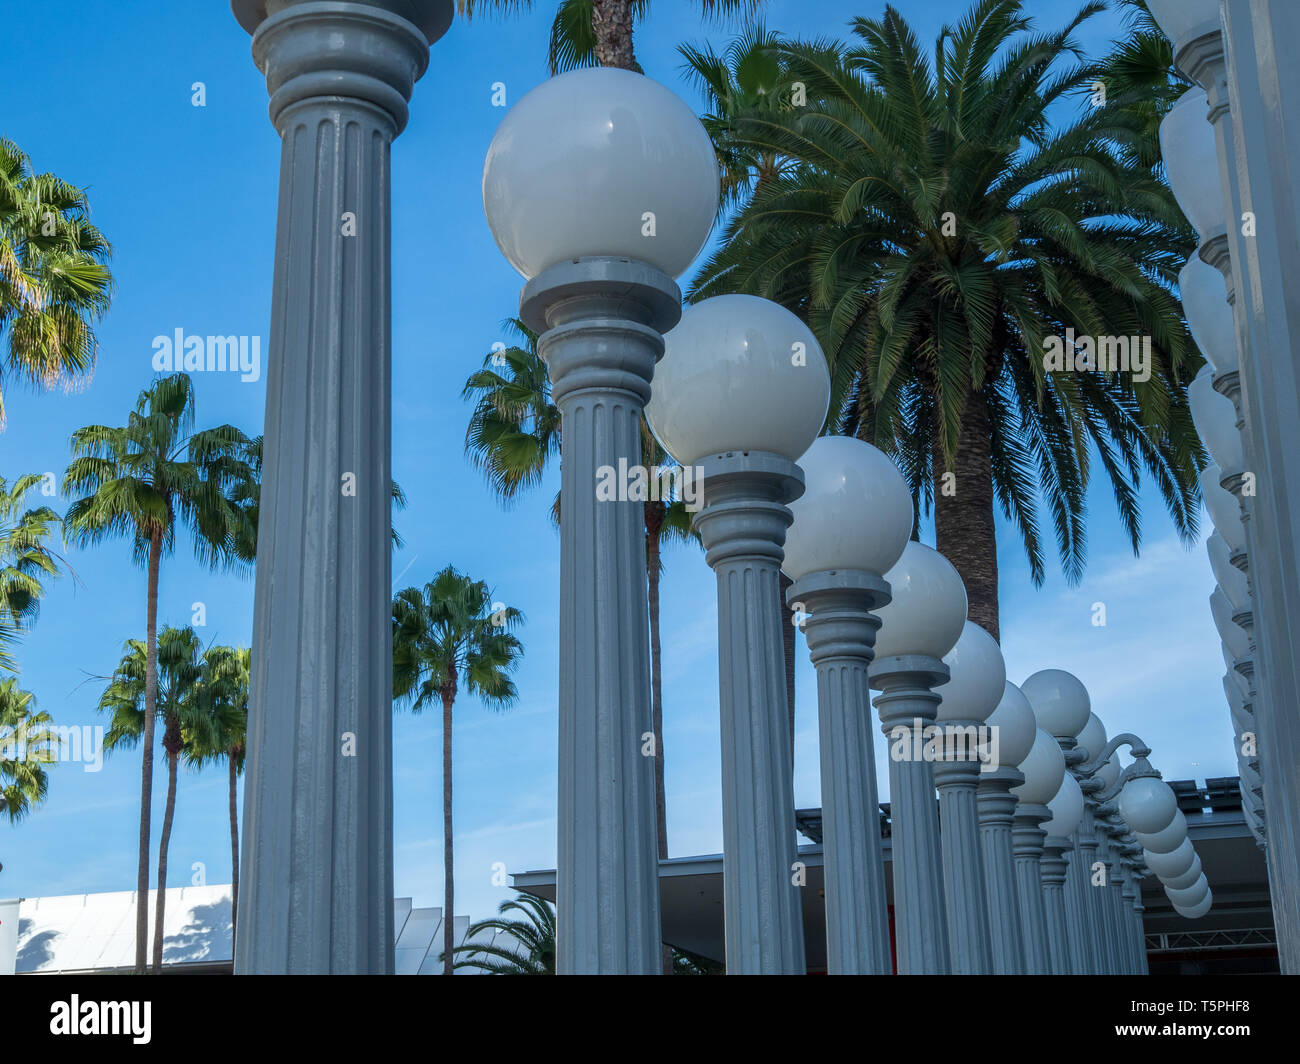 Classic circular light posts standing with palm trees in daytime Stock Photo